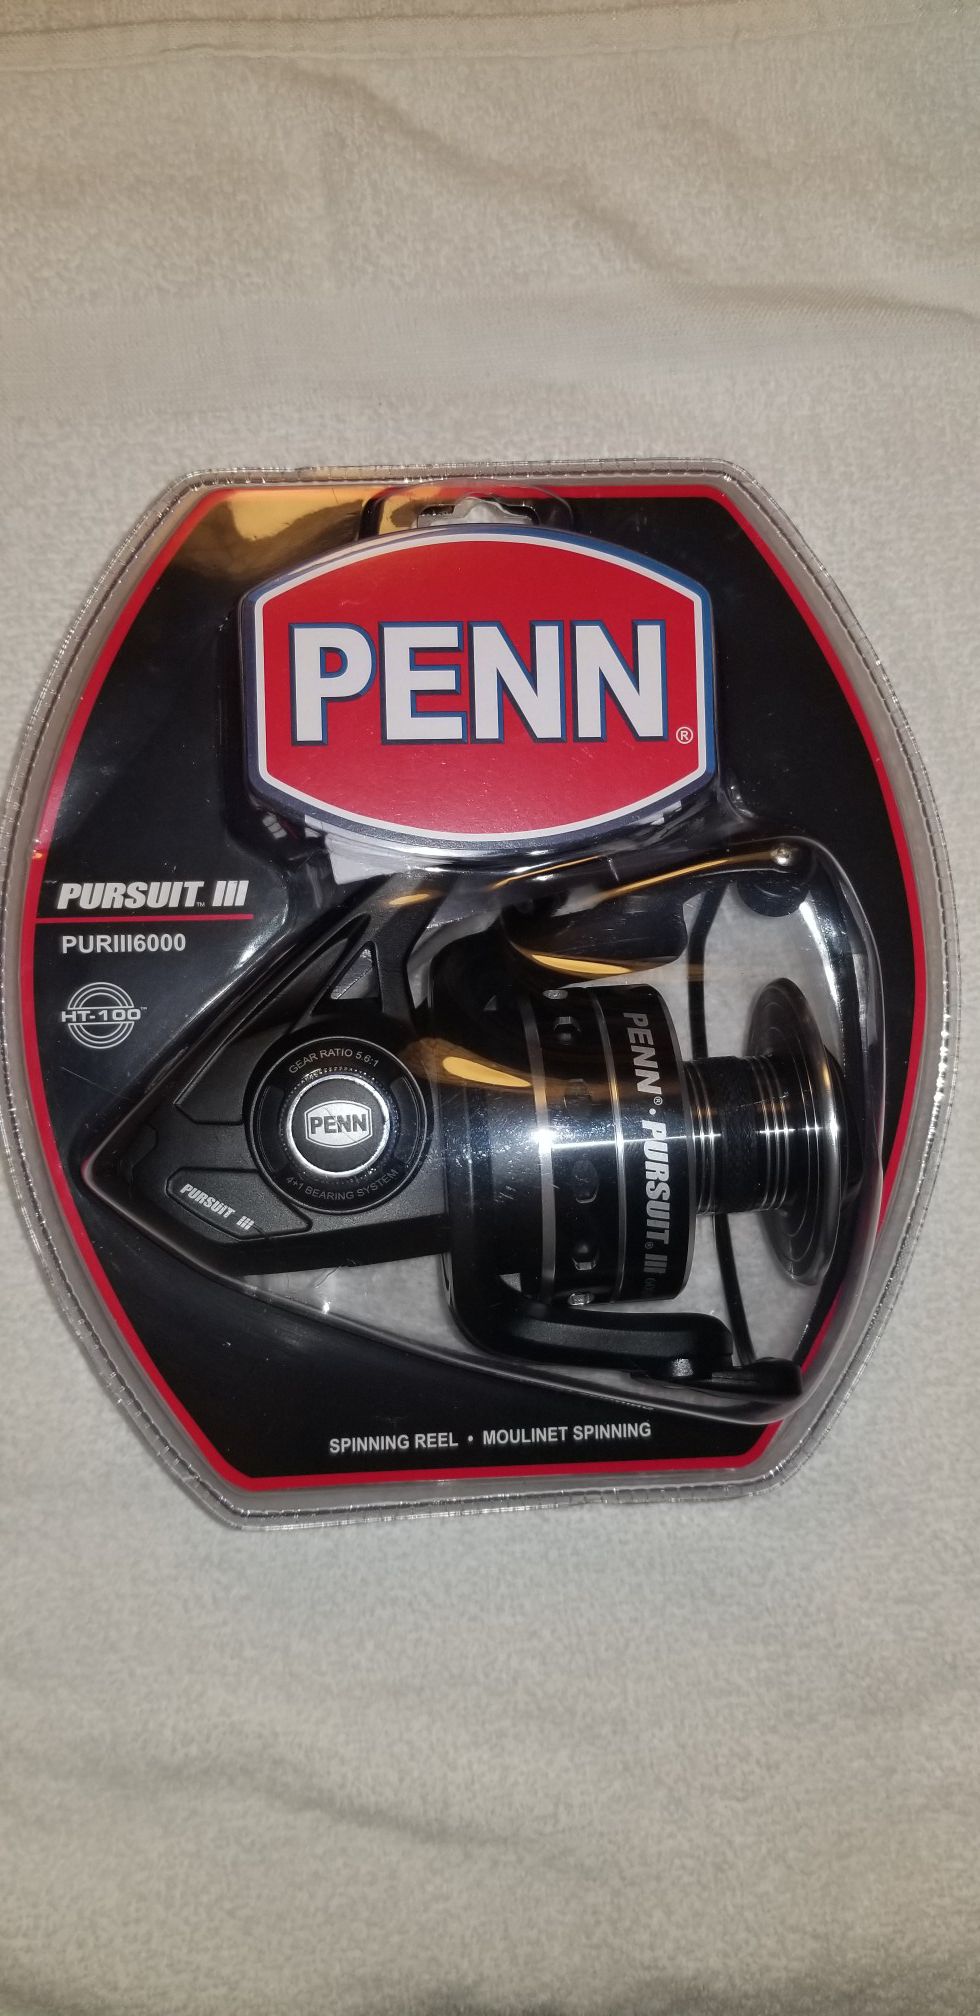 NEW Penn Pursuit III 6000 Spinning reel with one free lure